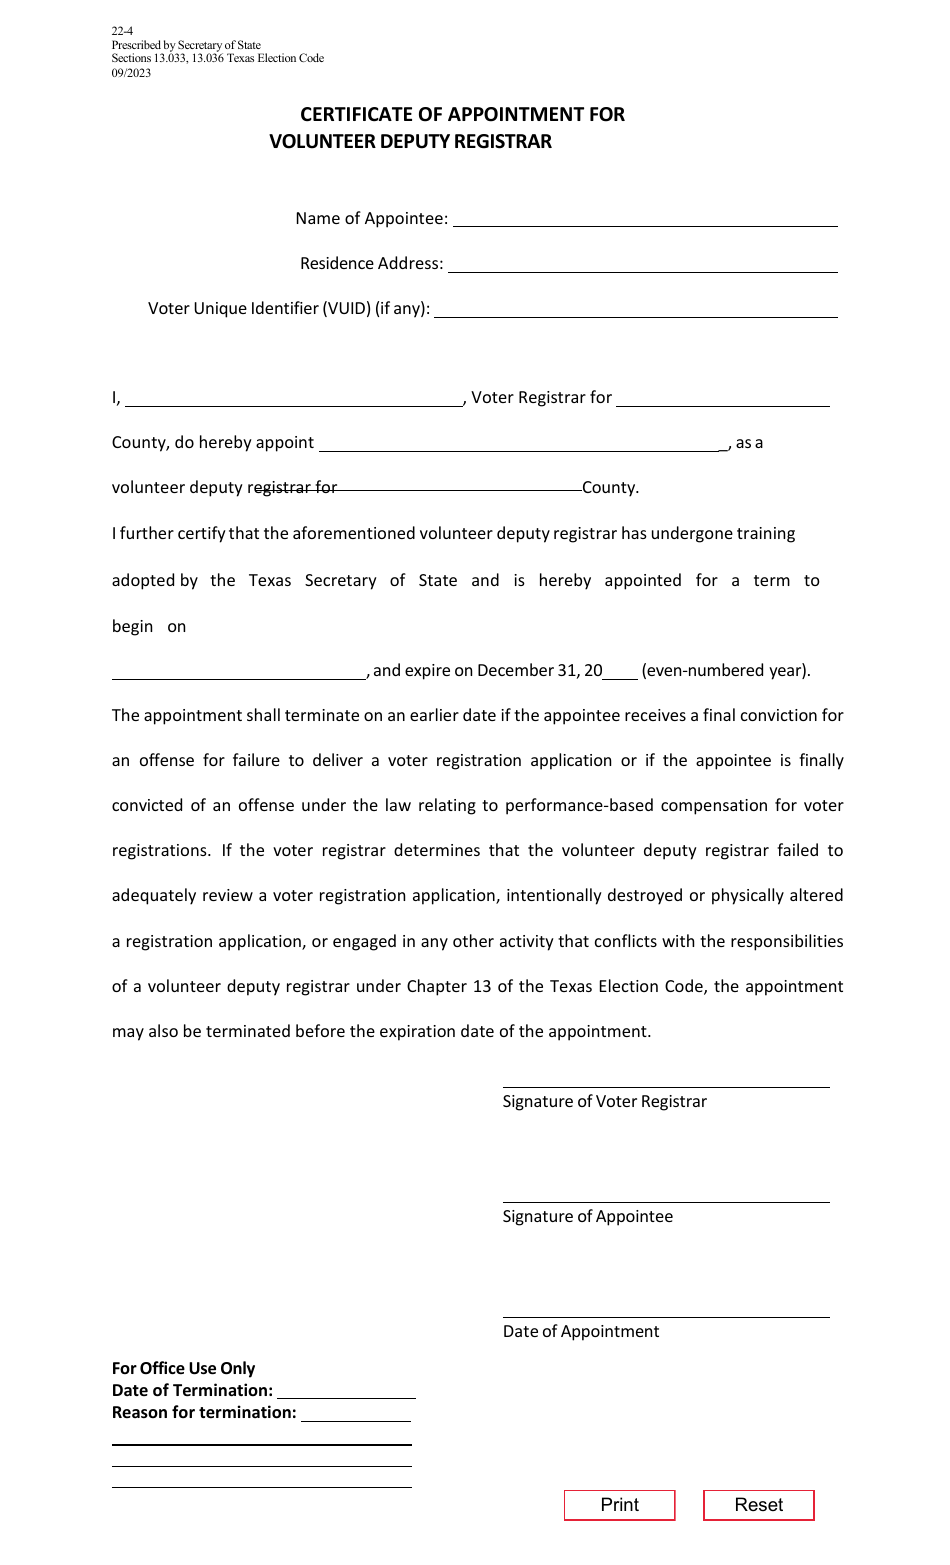 Form 22-4 Certificate of Appointment for Volunteer Deputy Registrar - Texas (English / Spanish), Page 1